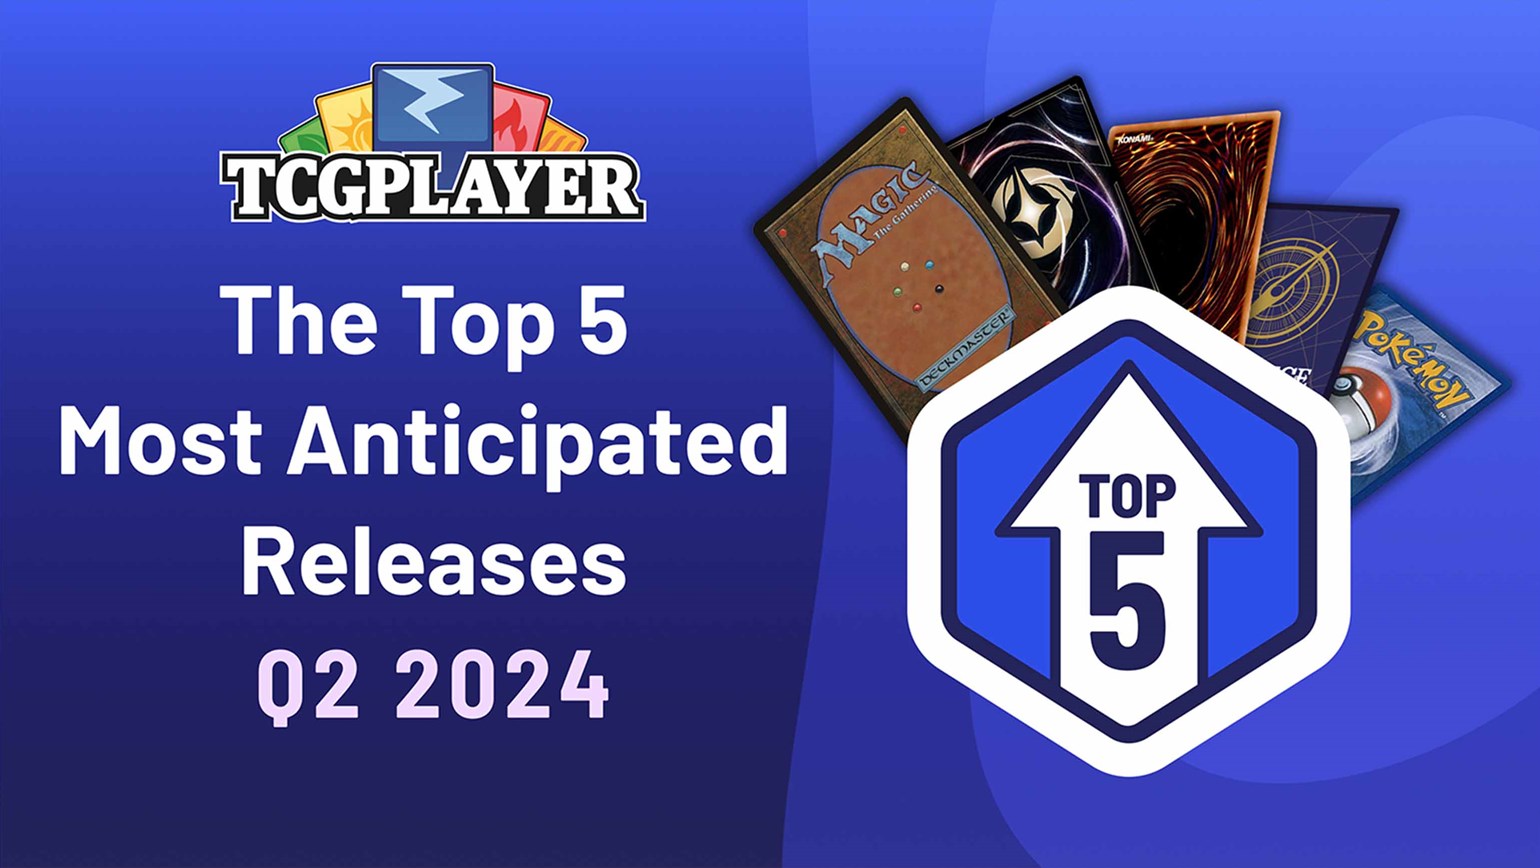 The Top 5 Most Anticipated Releases of Q2 2024